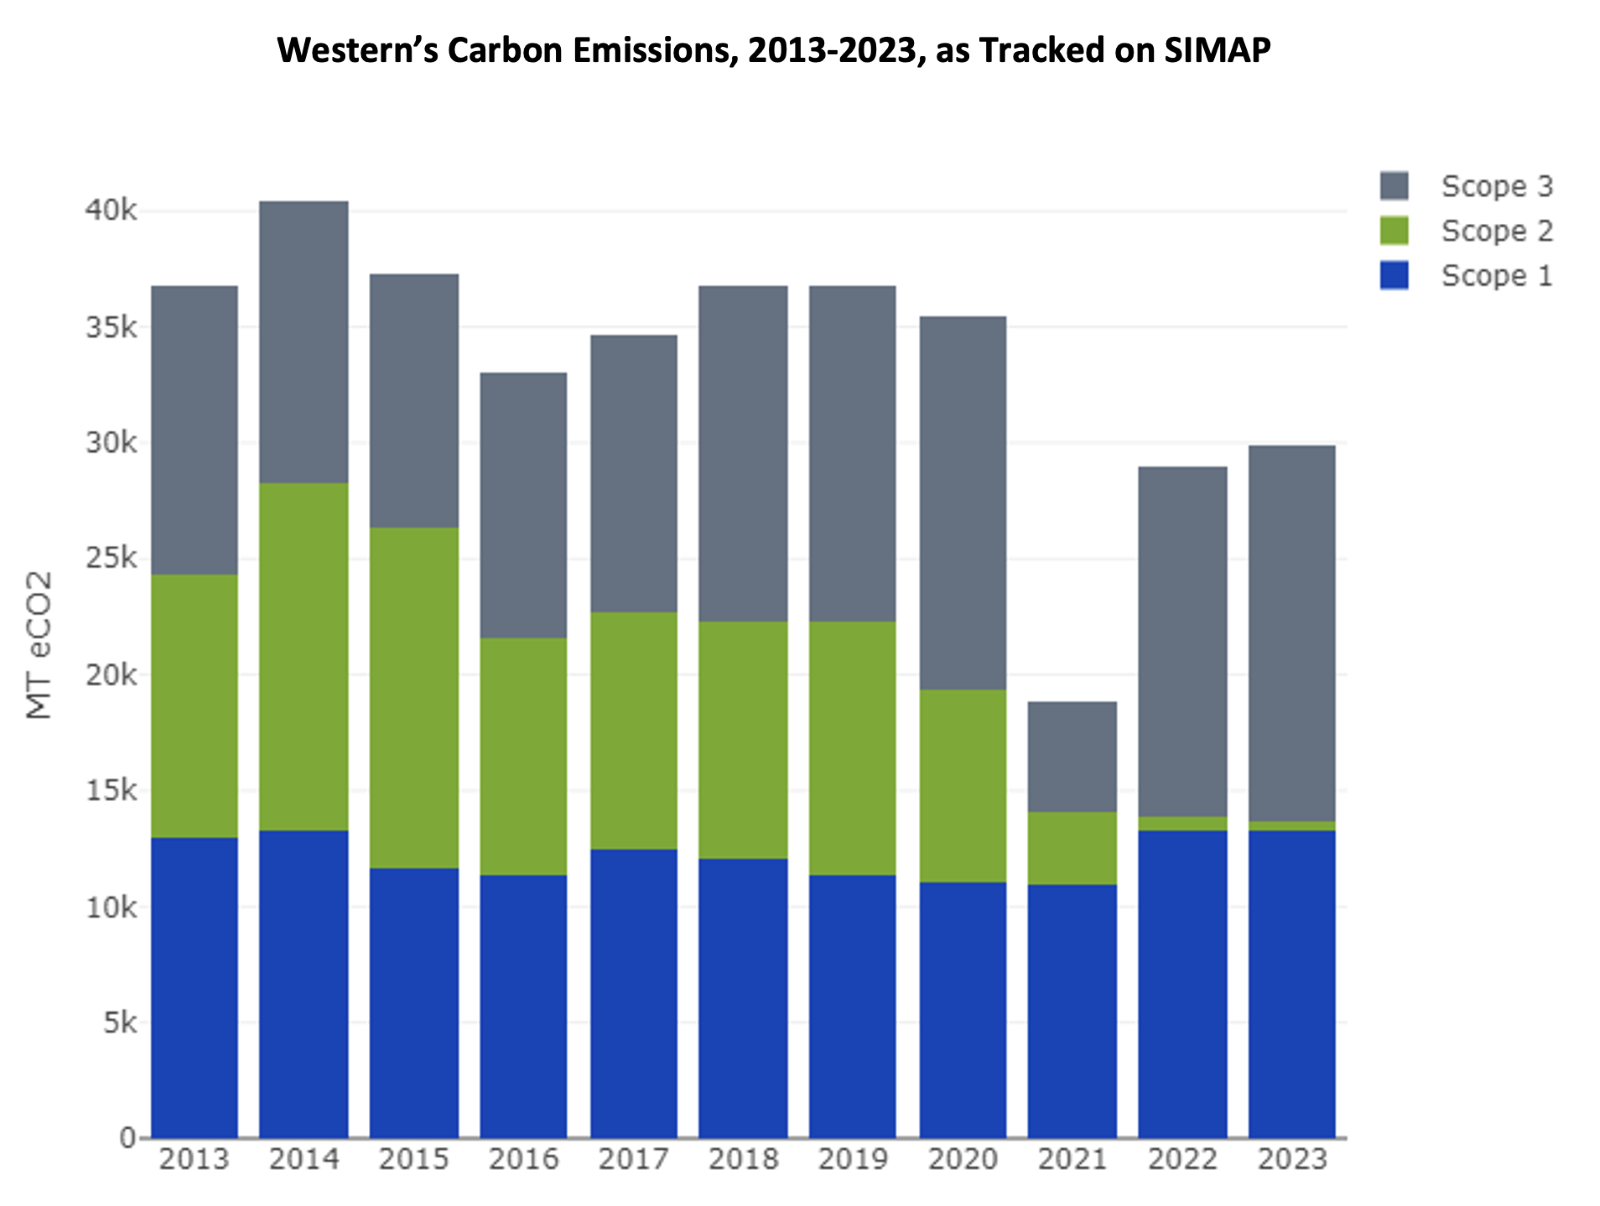 The image shows a bar graph of Western’s carbon dioxide equivalent emissions from 2013 to 2023 in metric tons (MT)